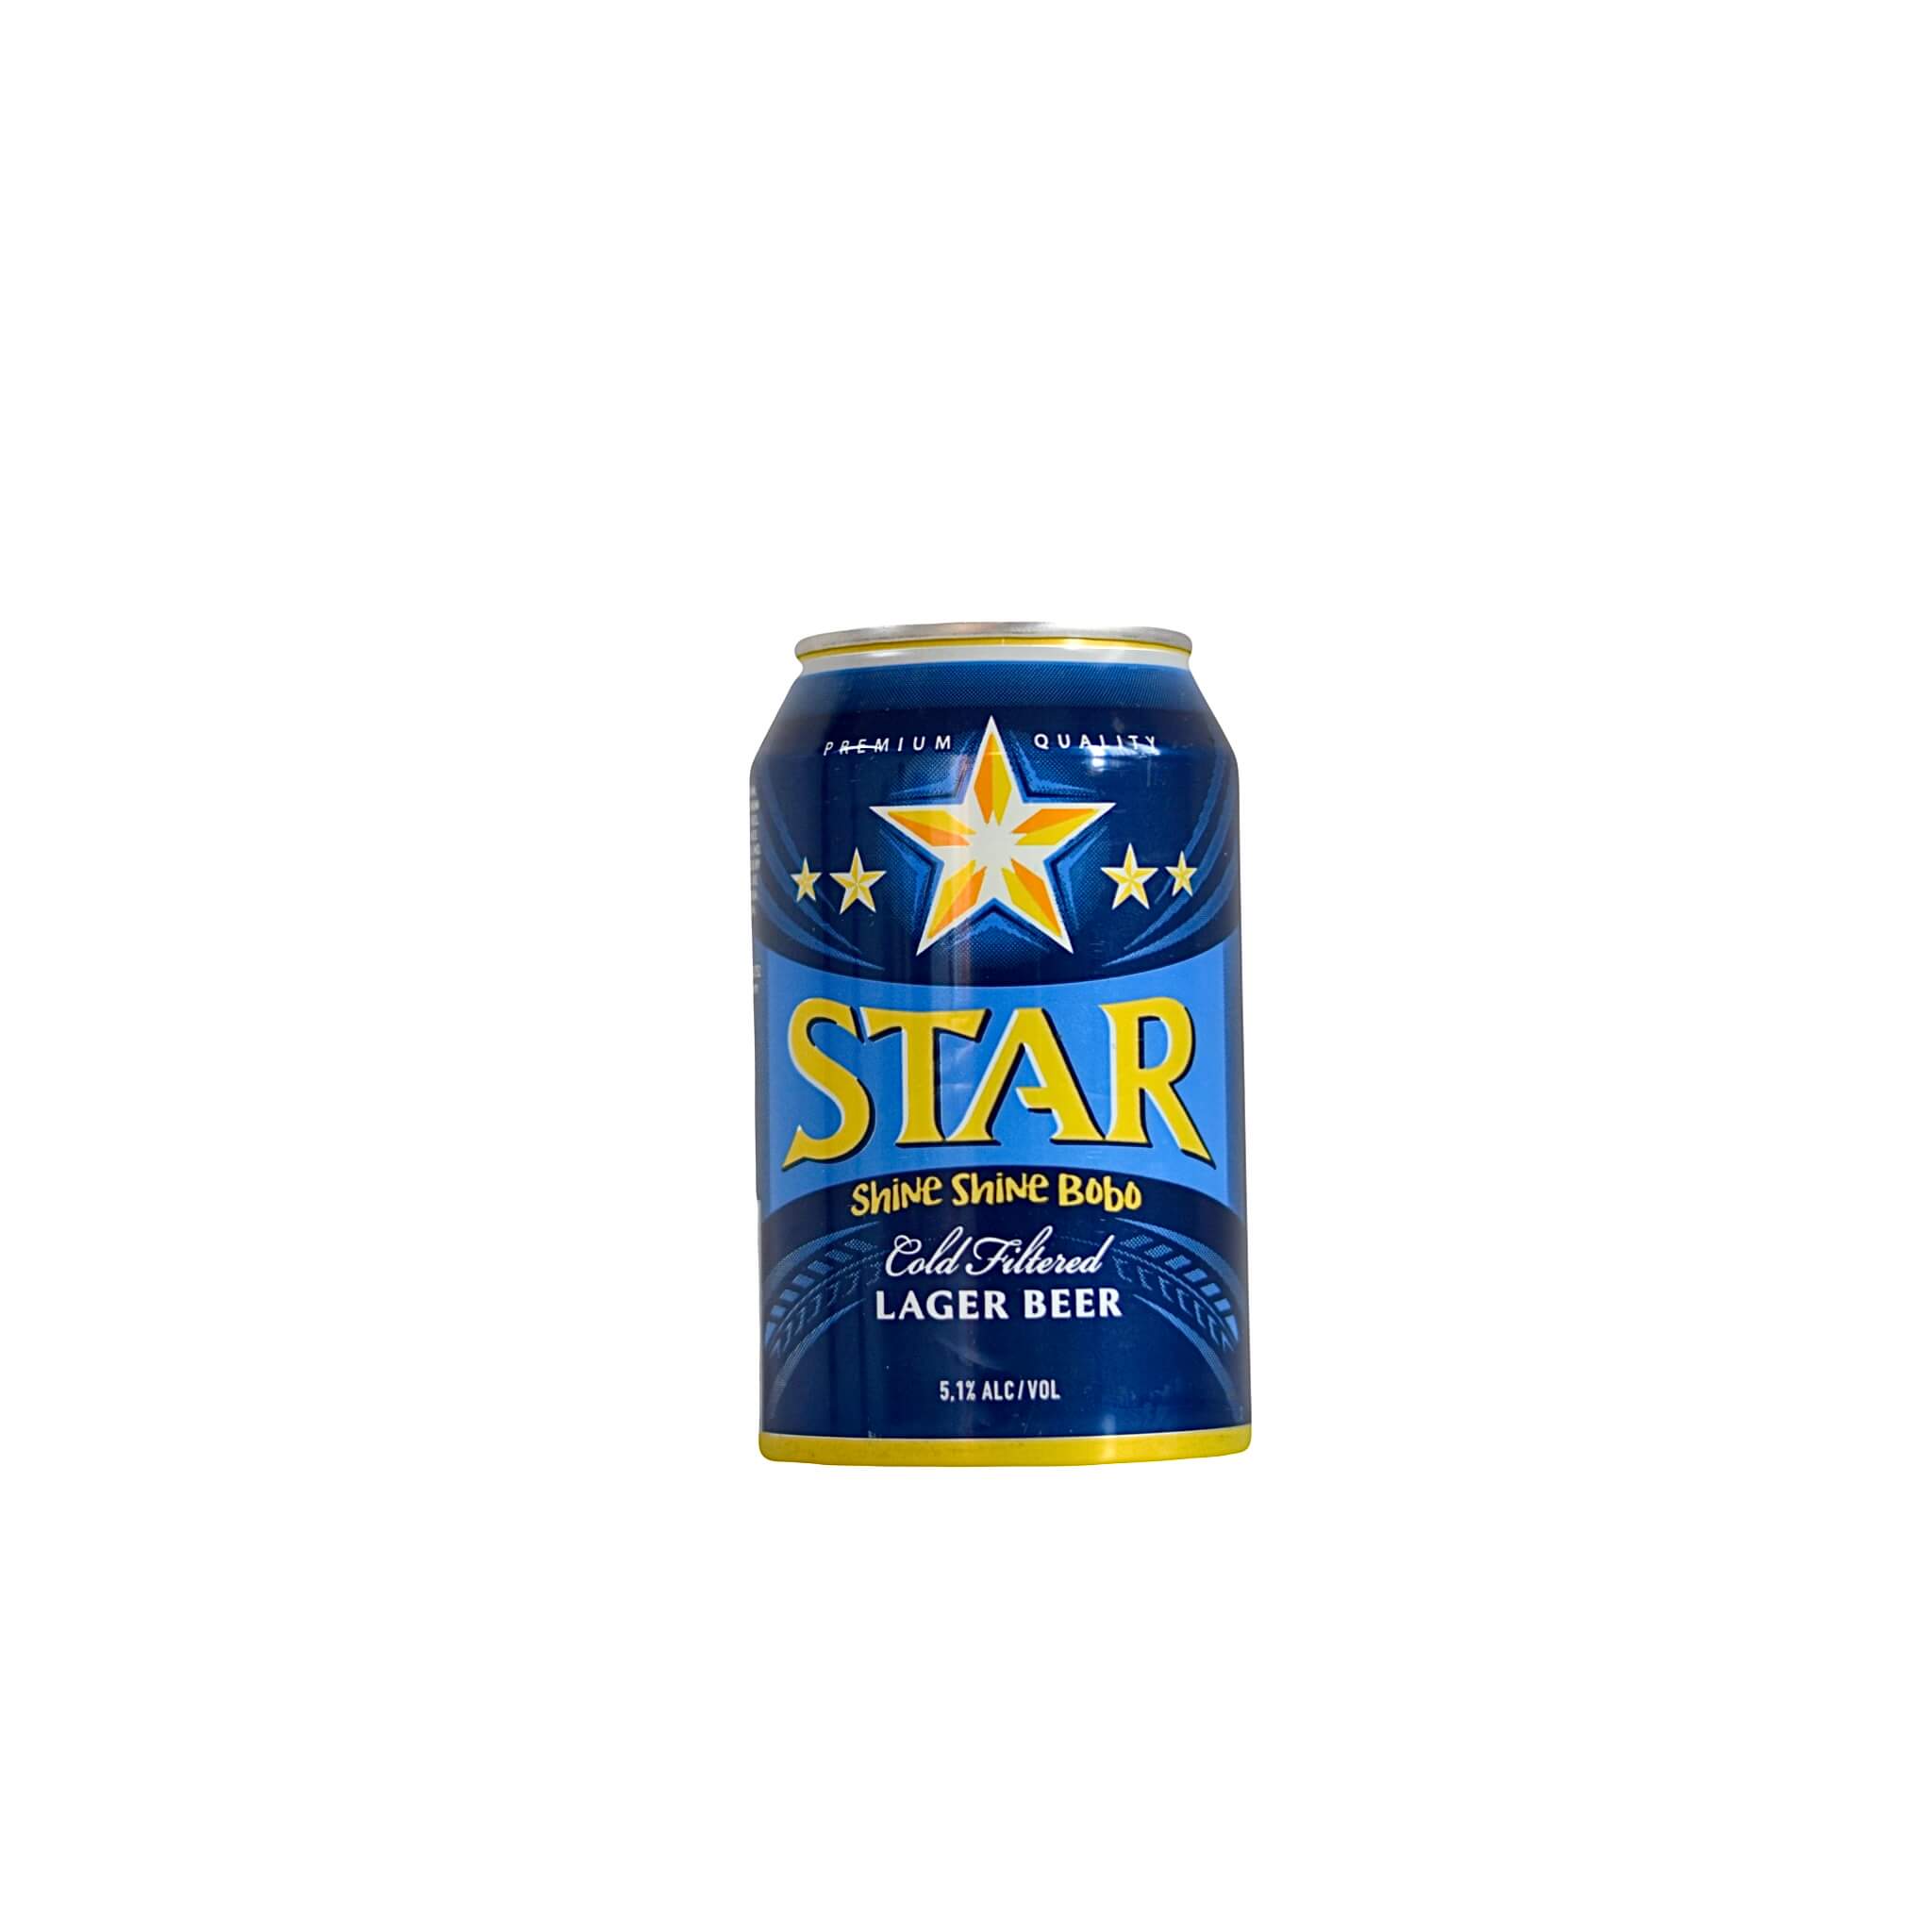 A can of Star beer